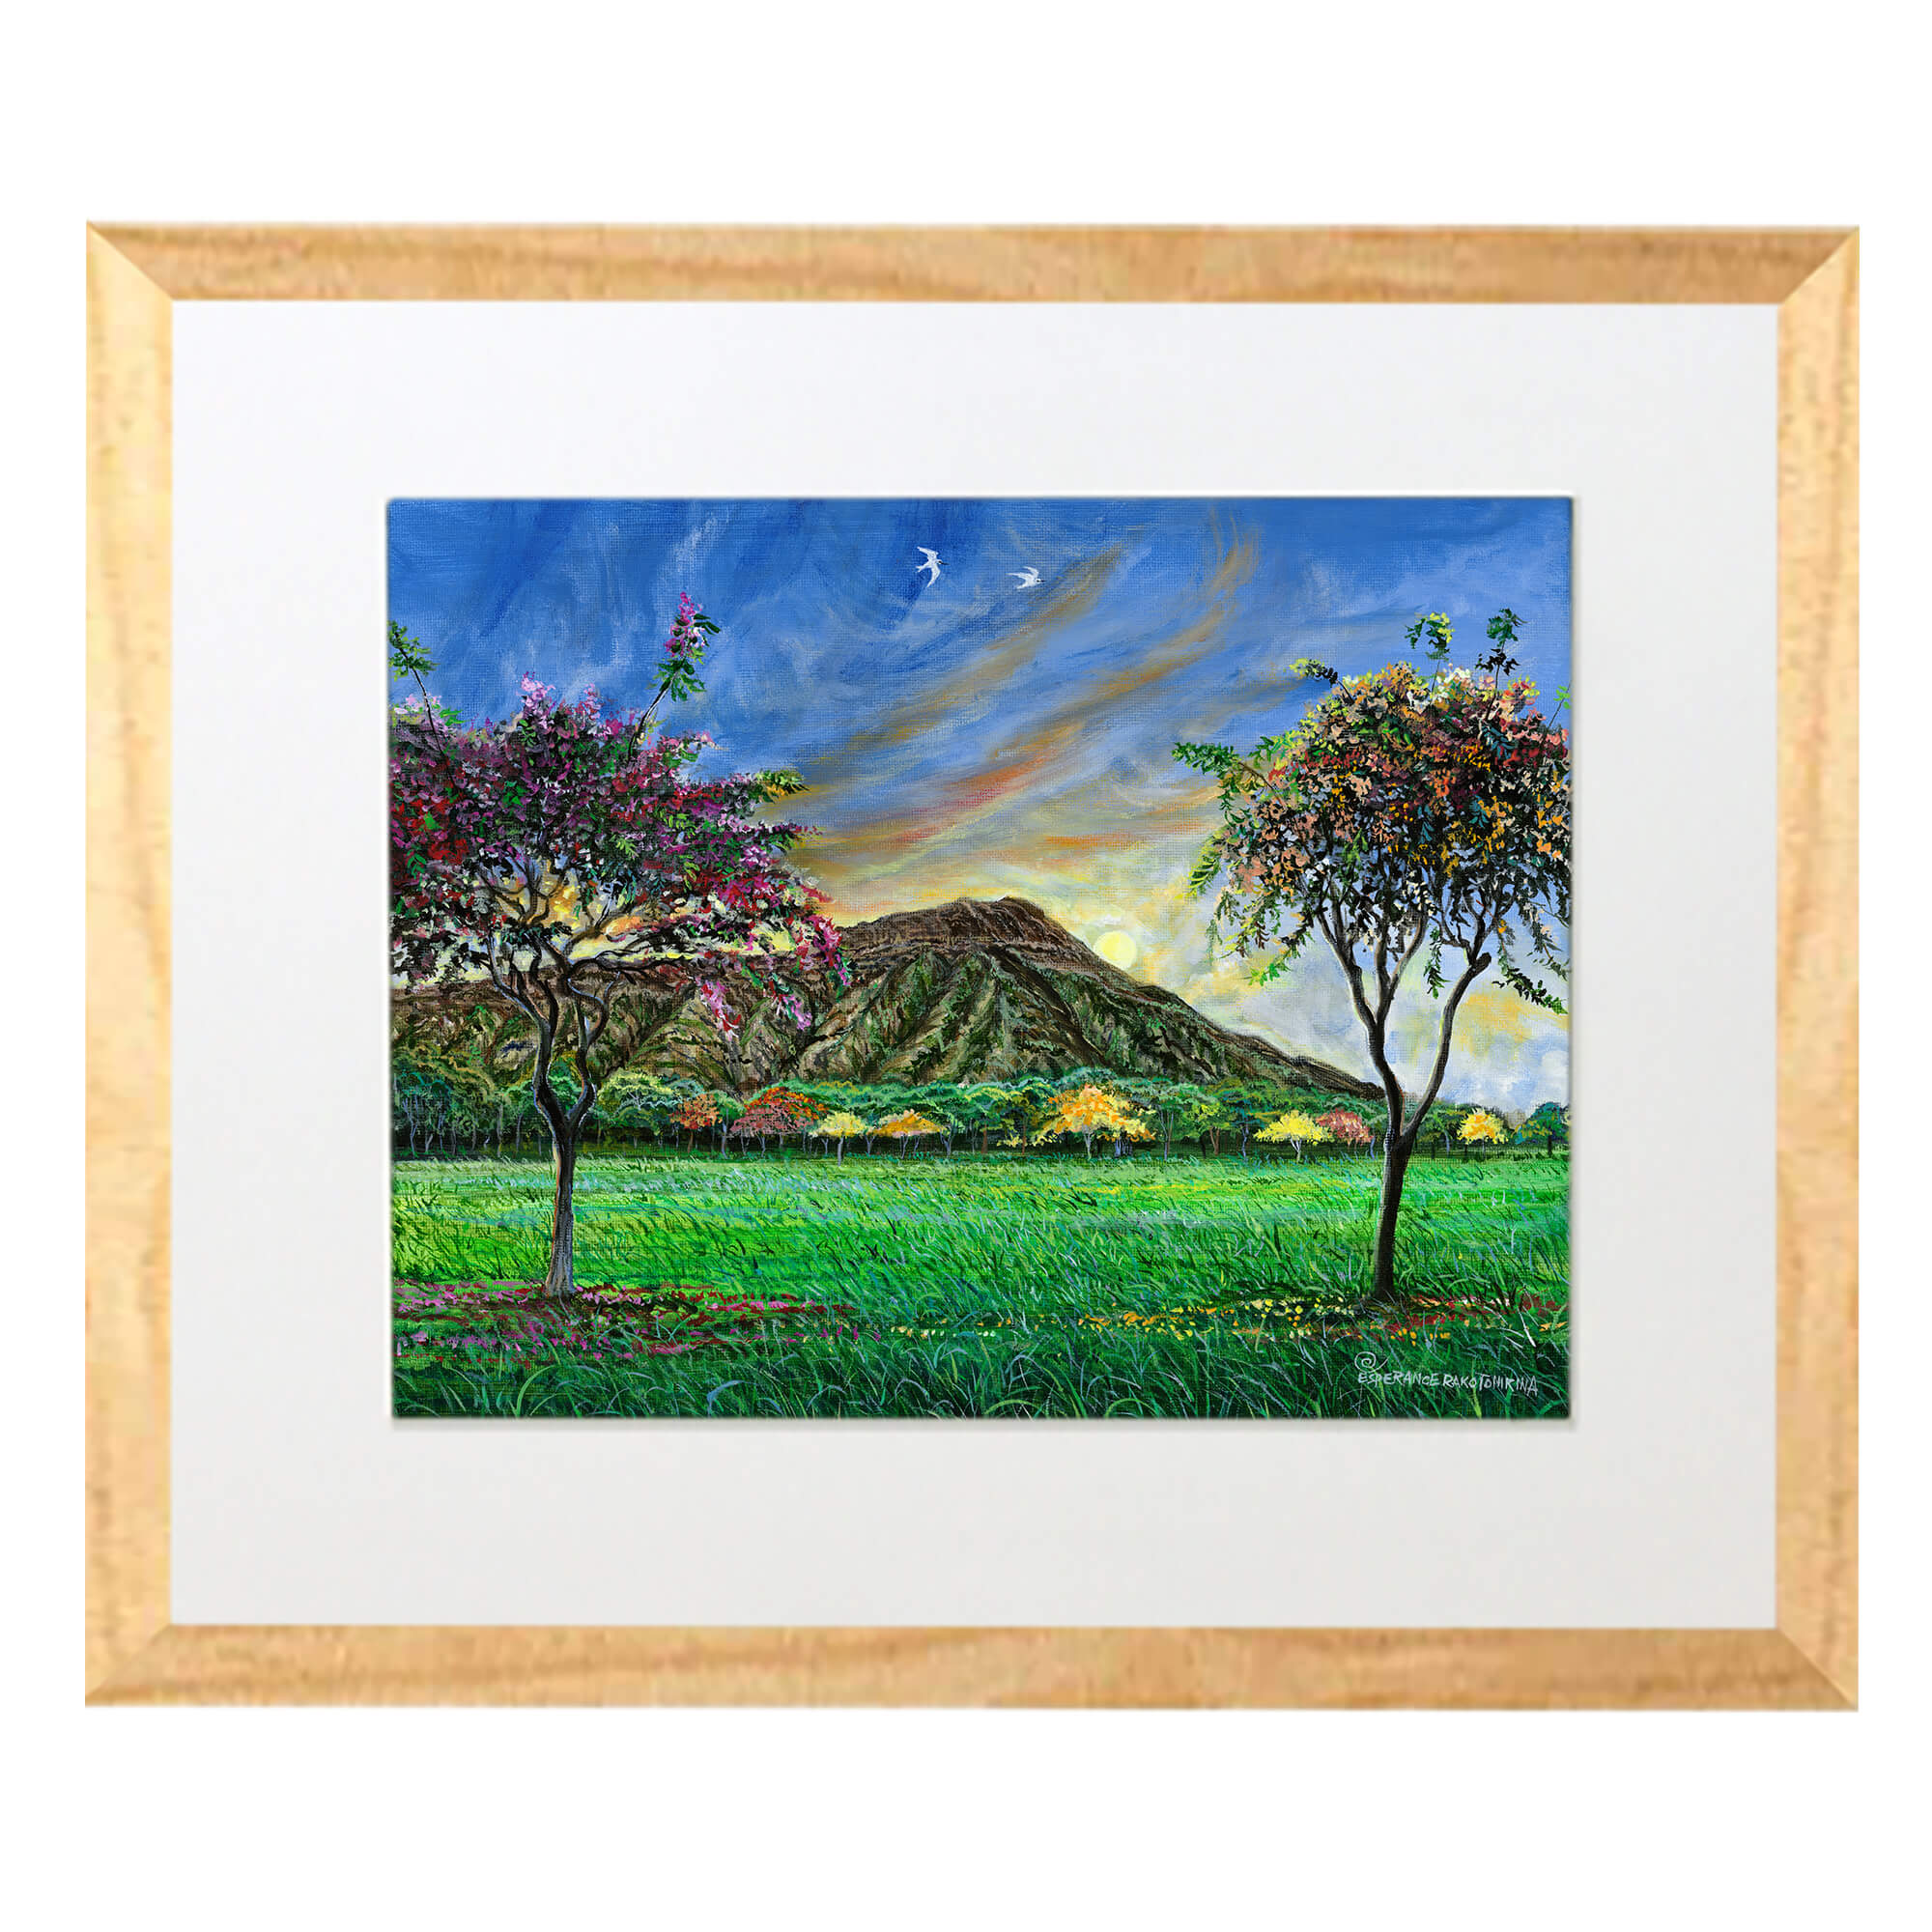 A matted art print with wood frame illustrating a Tranquil mountain scene with trees by hawaii artist Esperance Rakotonirina